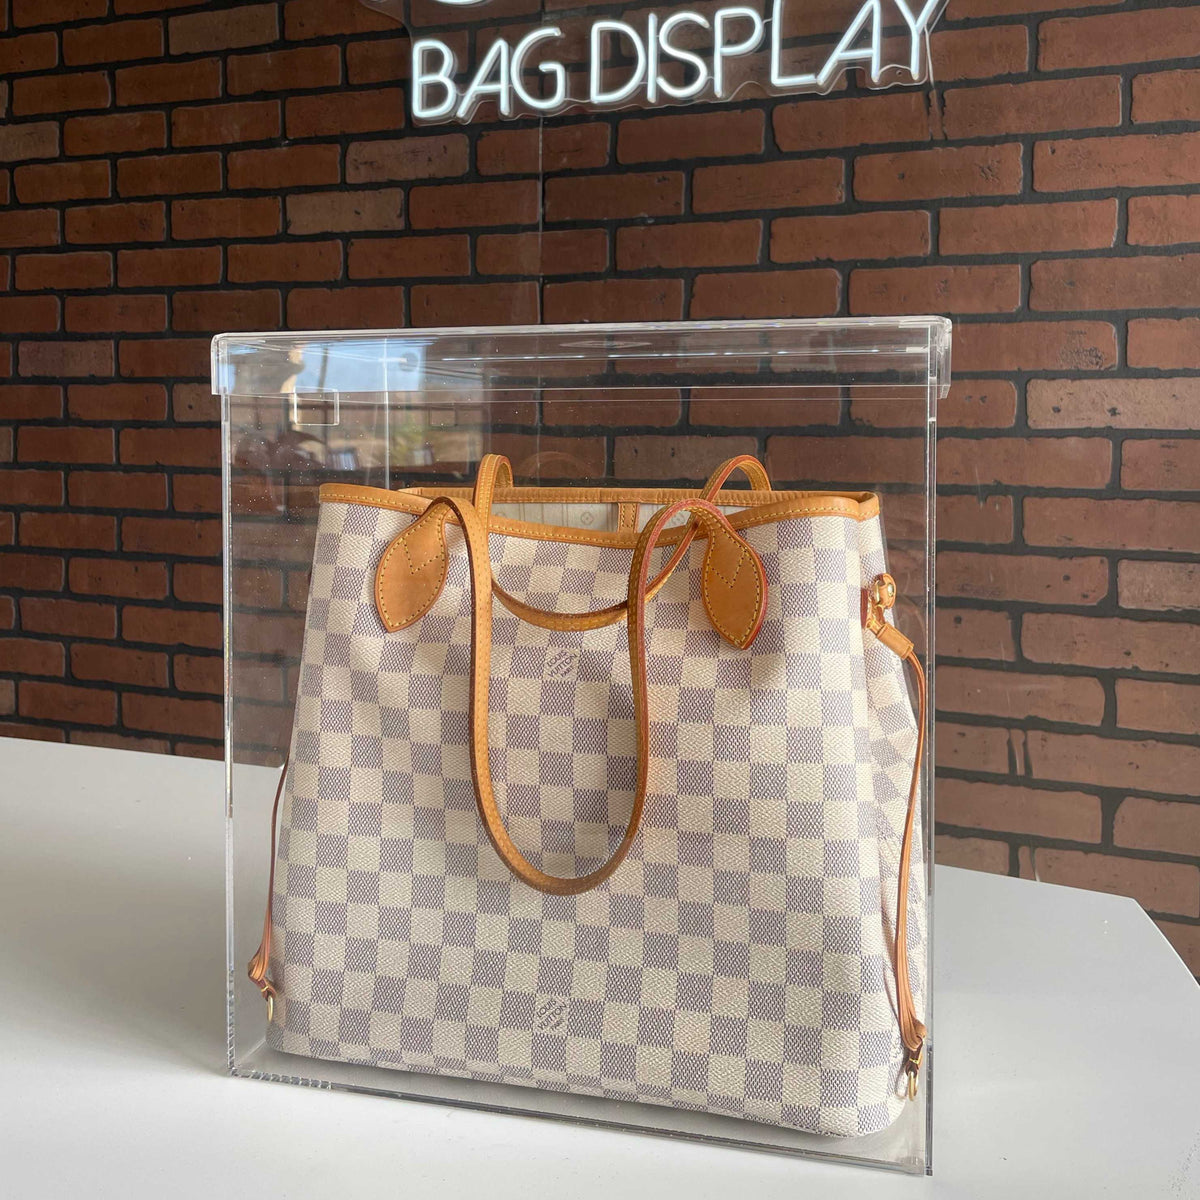 Perfect Shopper Tote: Why the Louis Vuitton Neverfull PM is a Must